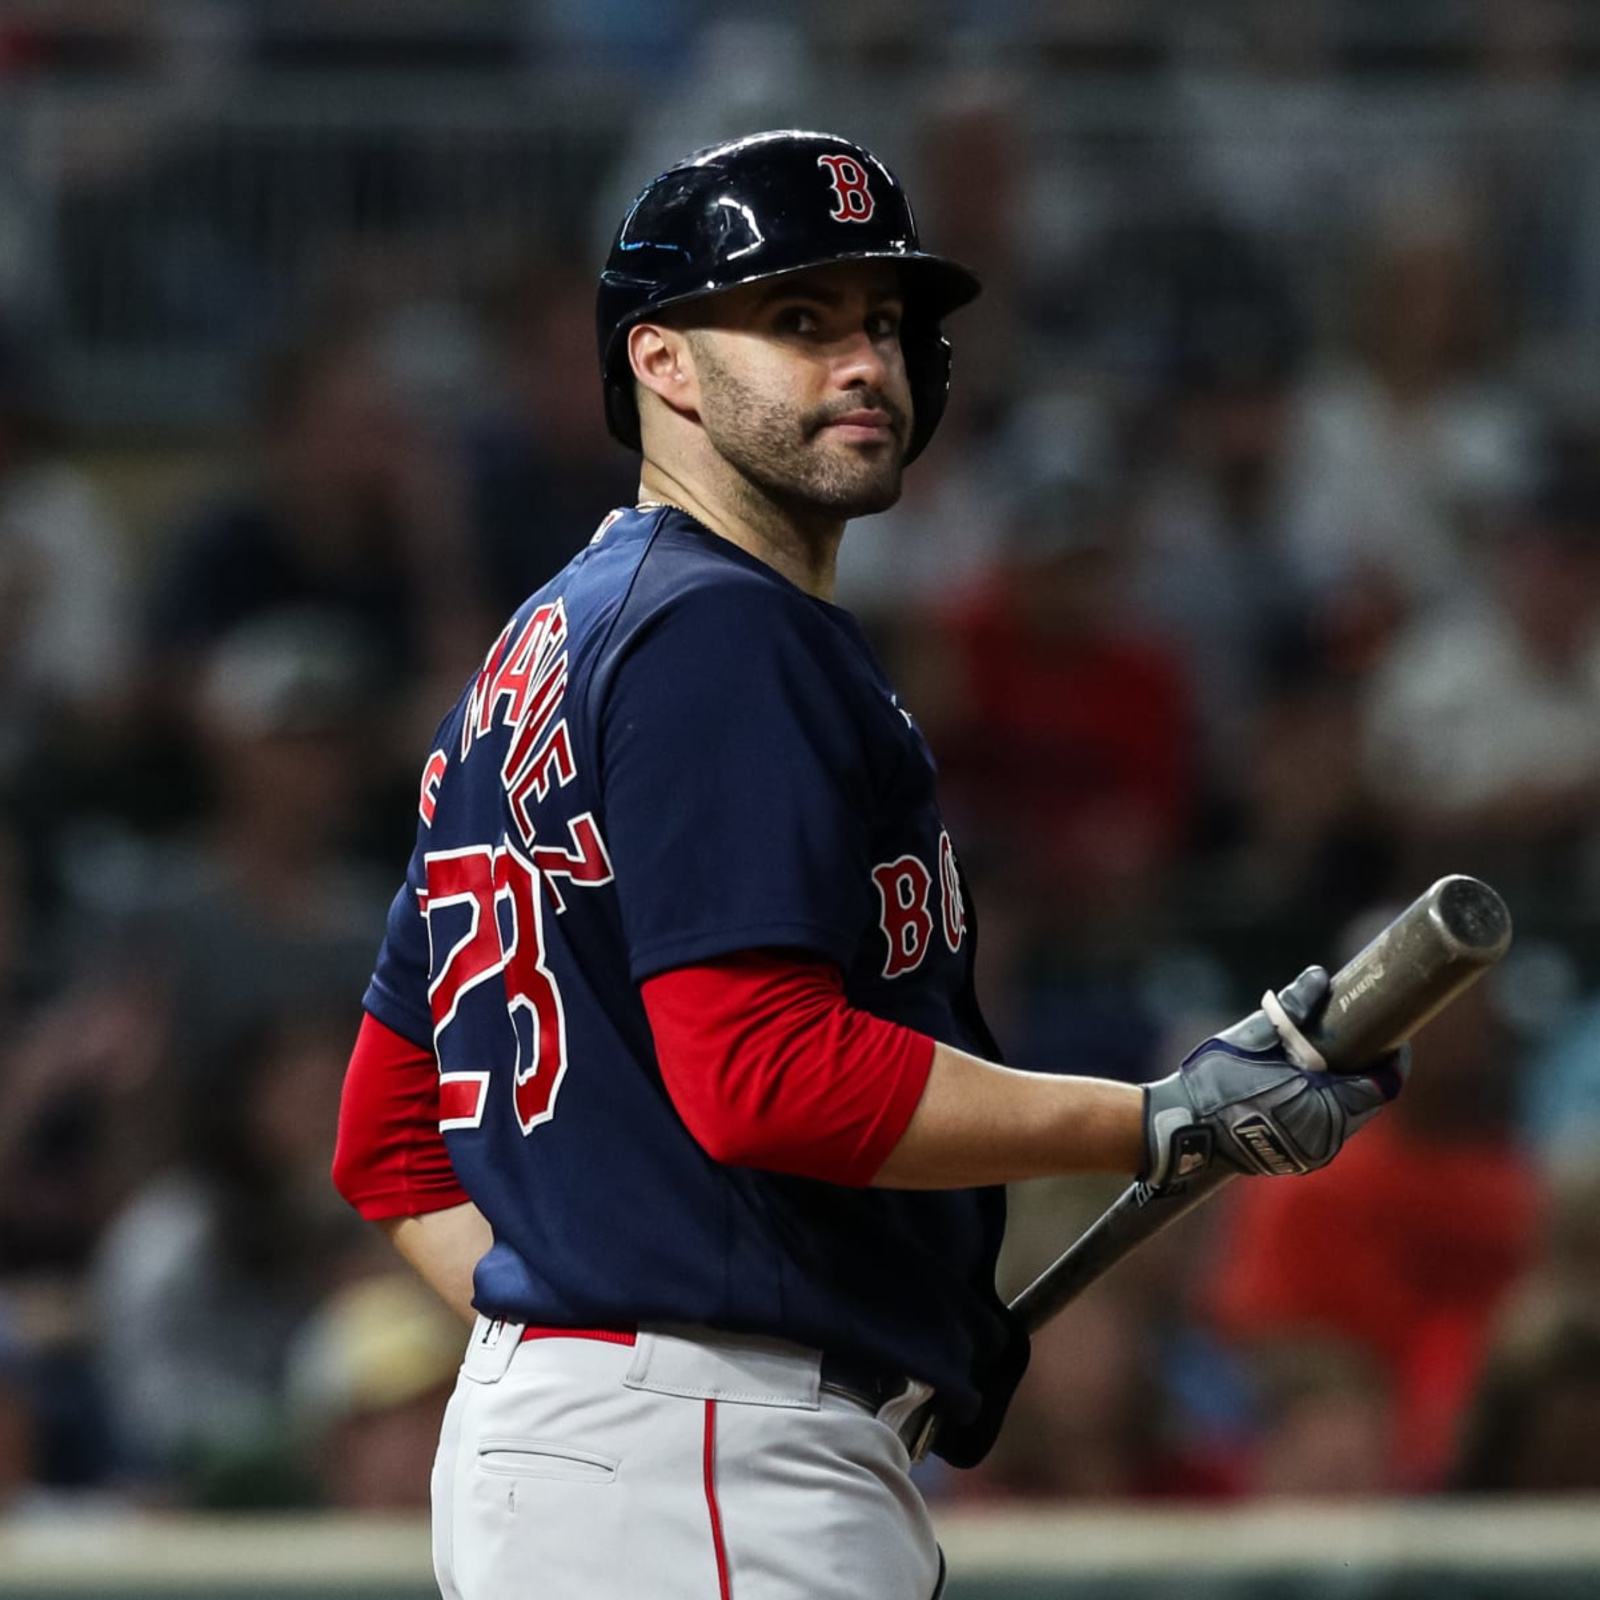 J.D. Martinez signs with Dodgers in steal of a deal